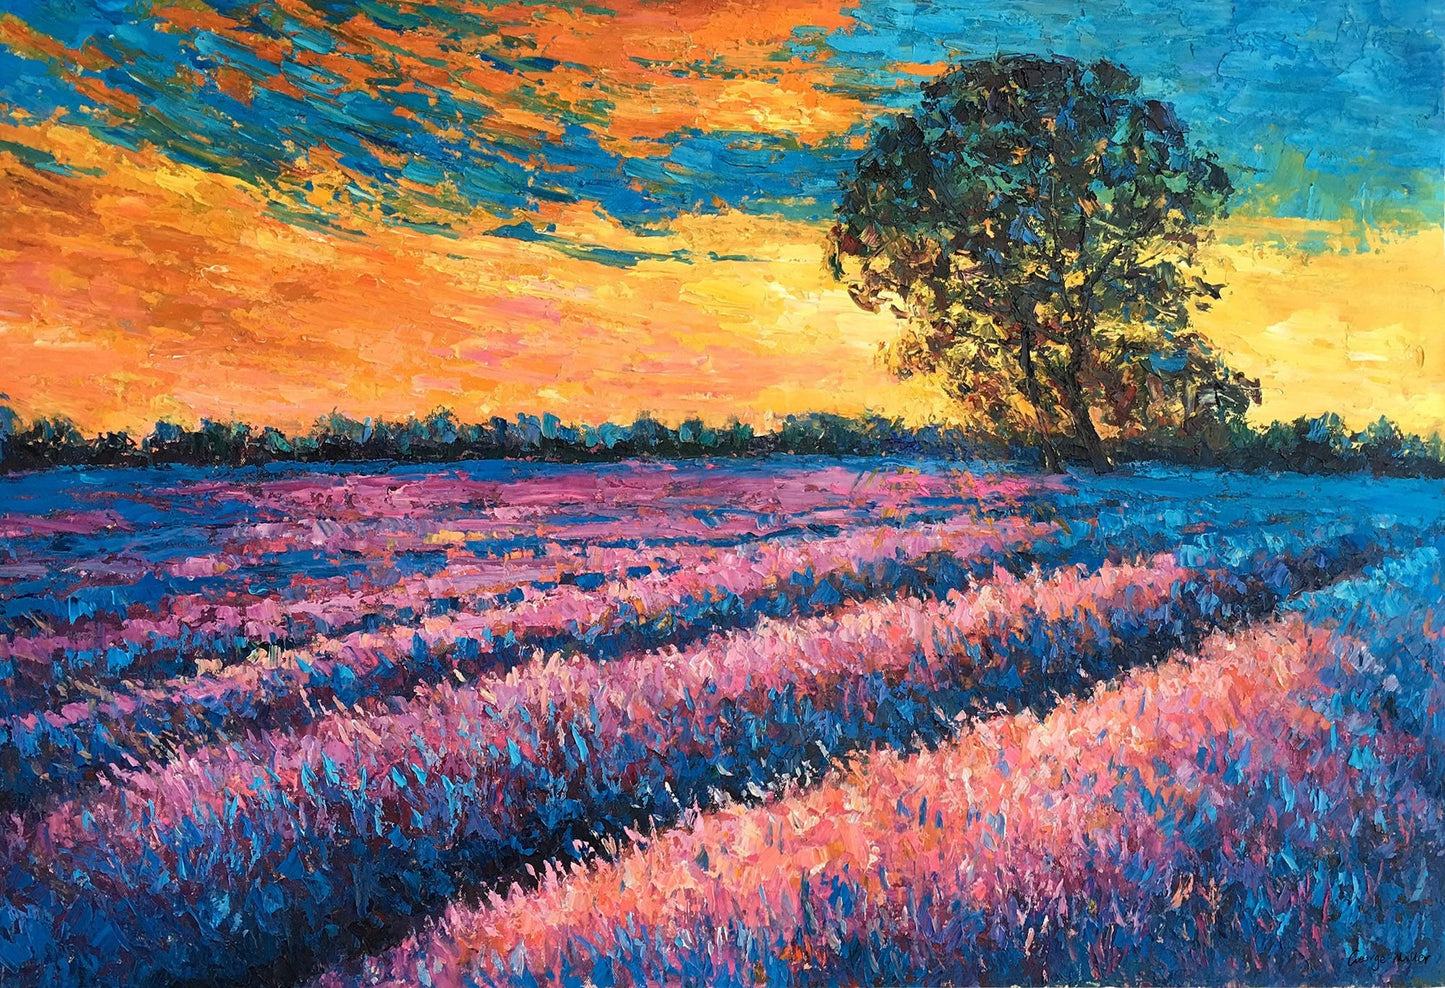 Landscape Oil Painting French Provence Lavender Fields Sunset, Wall Art, Large Painting, Handmade Painting, Modern Painting, Impasto